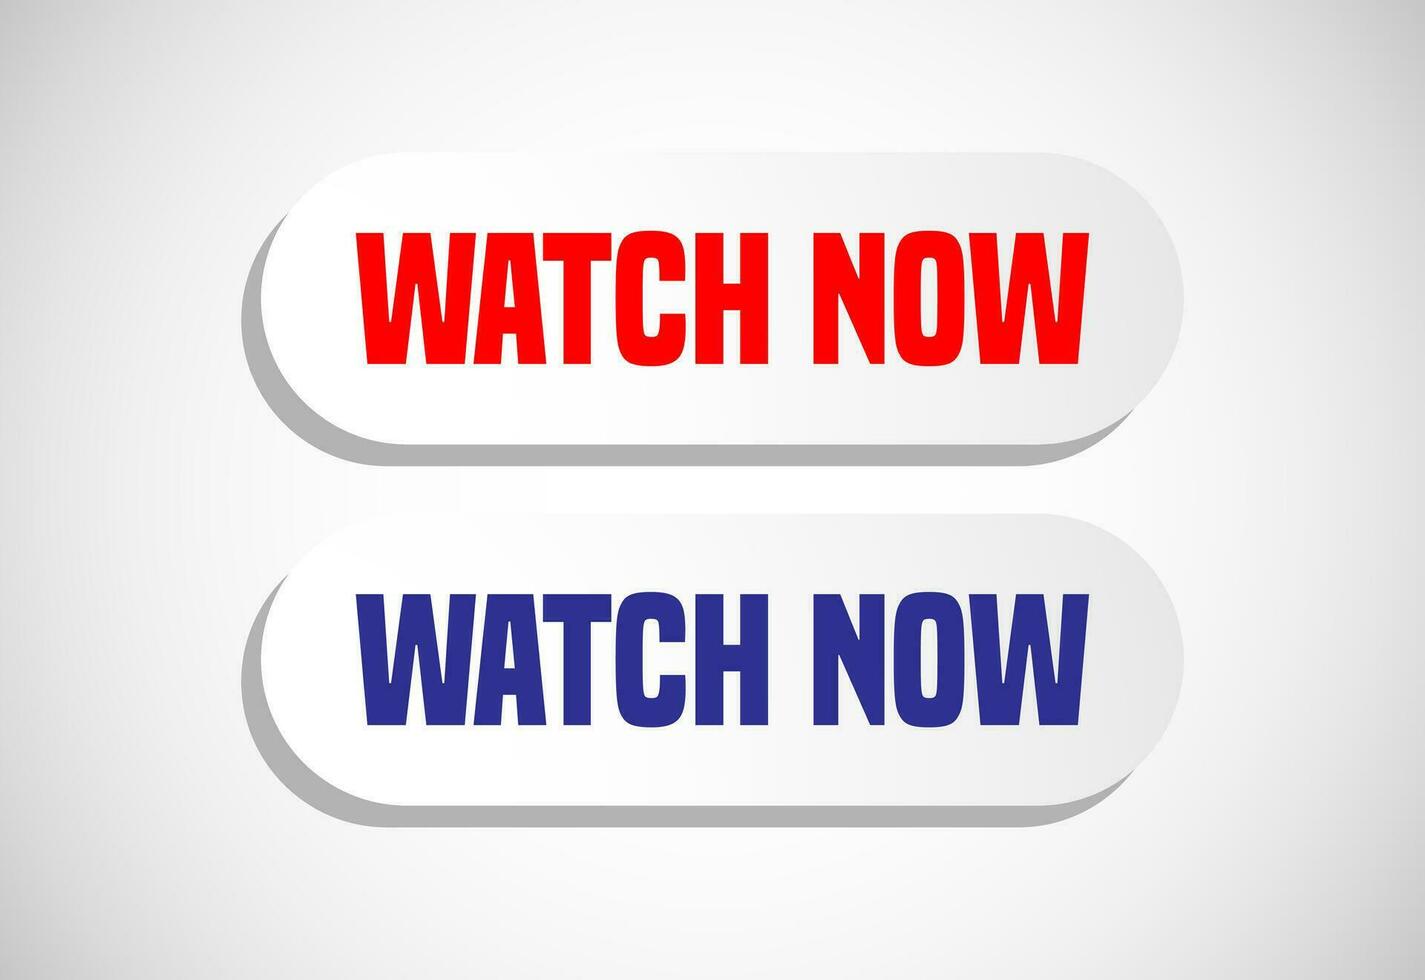 Watch now button. Watch now banner sign. Play video icon vector illustration.